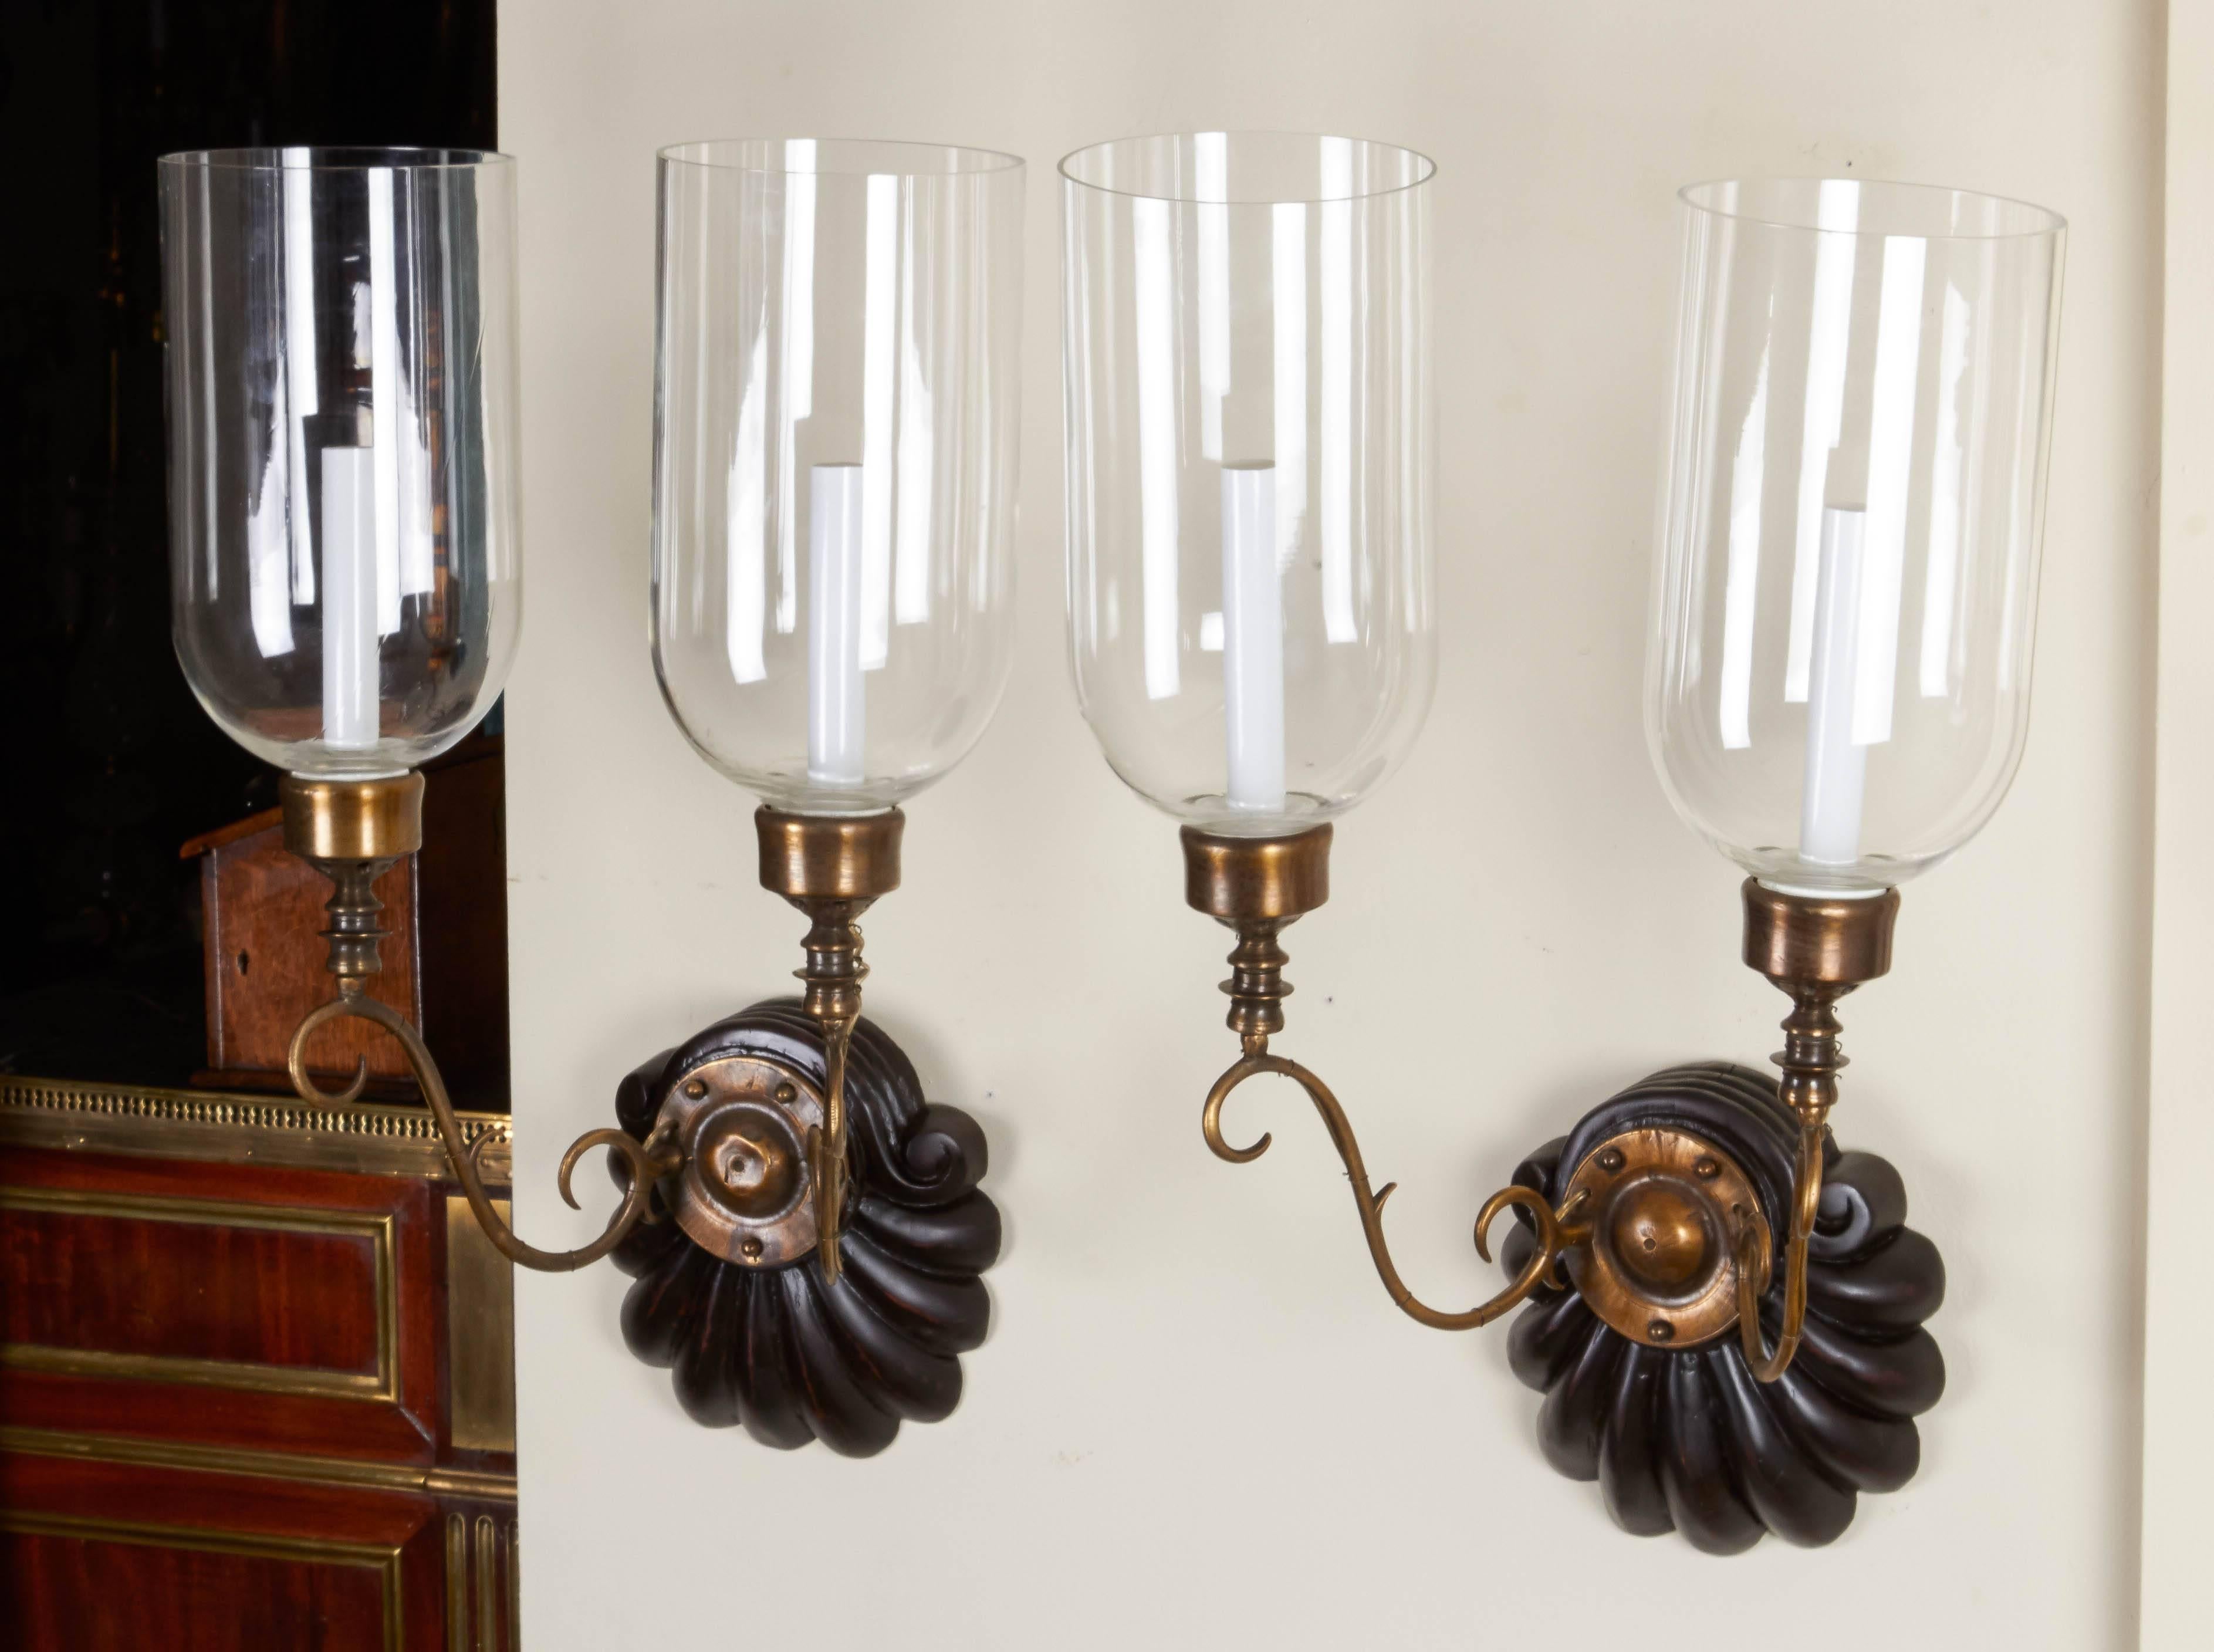 A pair of ebonized Anglo-Indian two-light sconces, shell form backplate issuing bronze out-scrolled candle-arms supporting a single Edison socket with hurricane shade, circa 1890.
Provenance- These sconces were purchased by Albert Nestle in India,